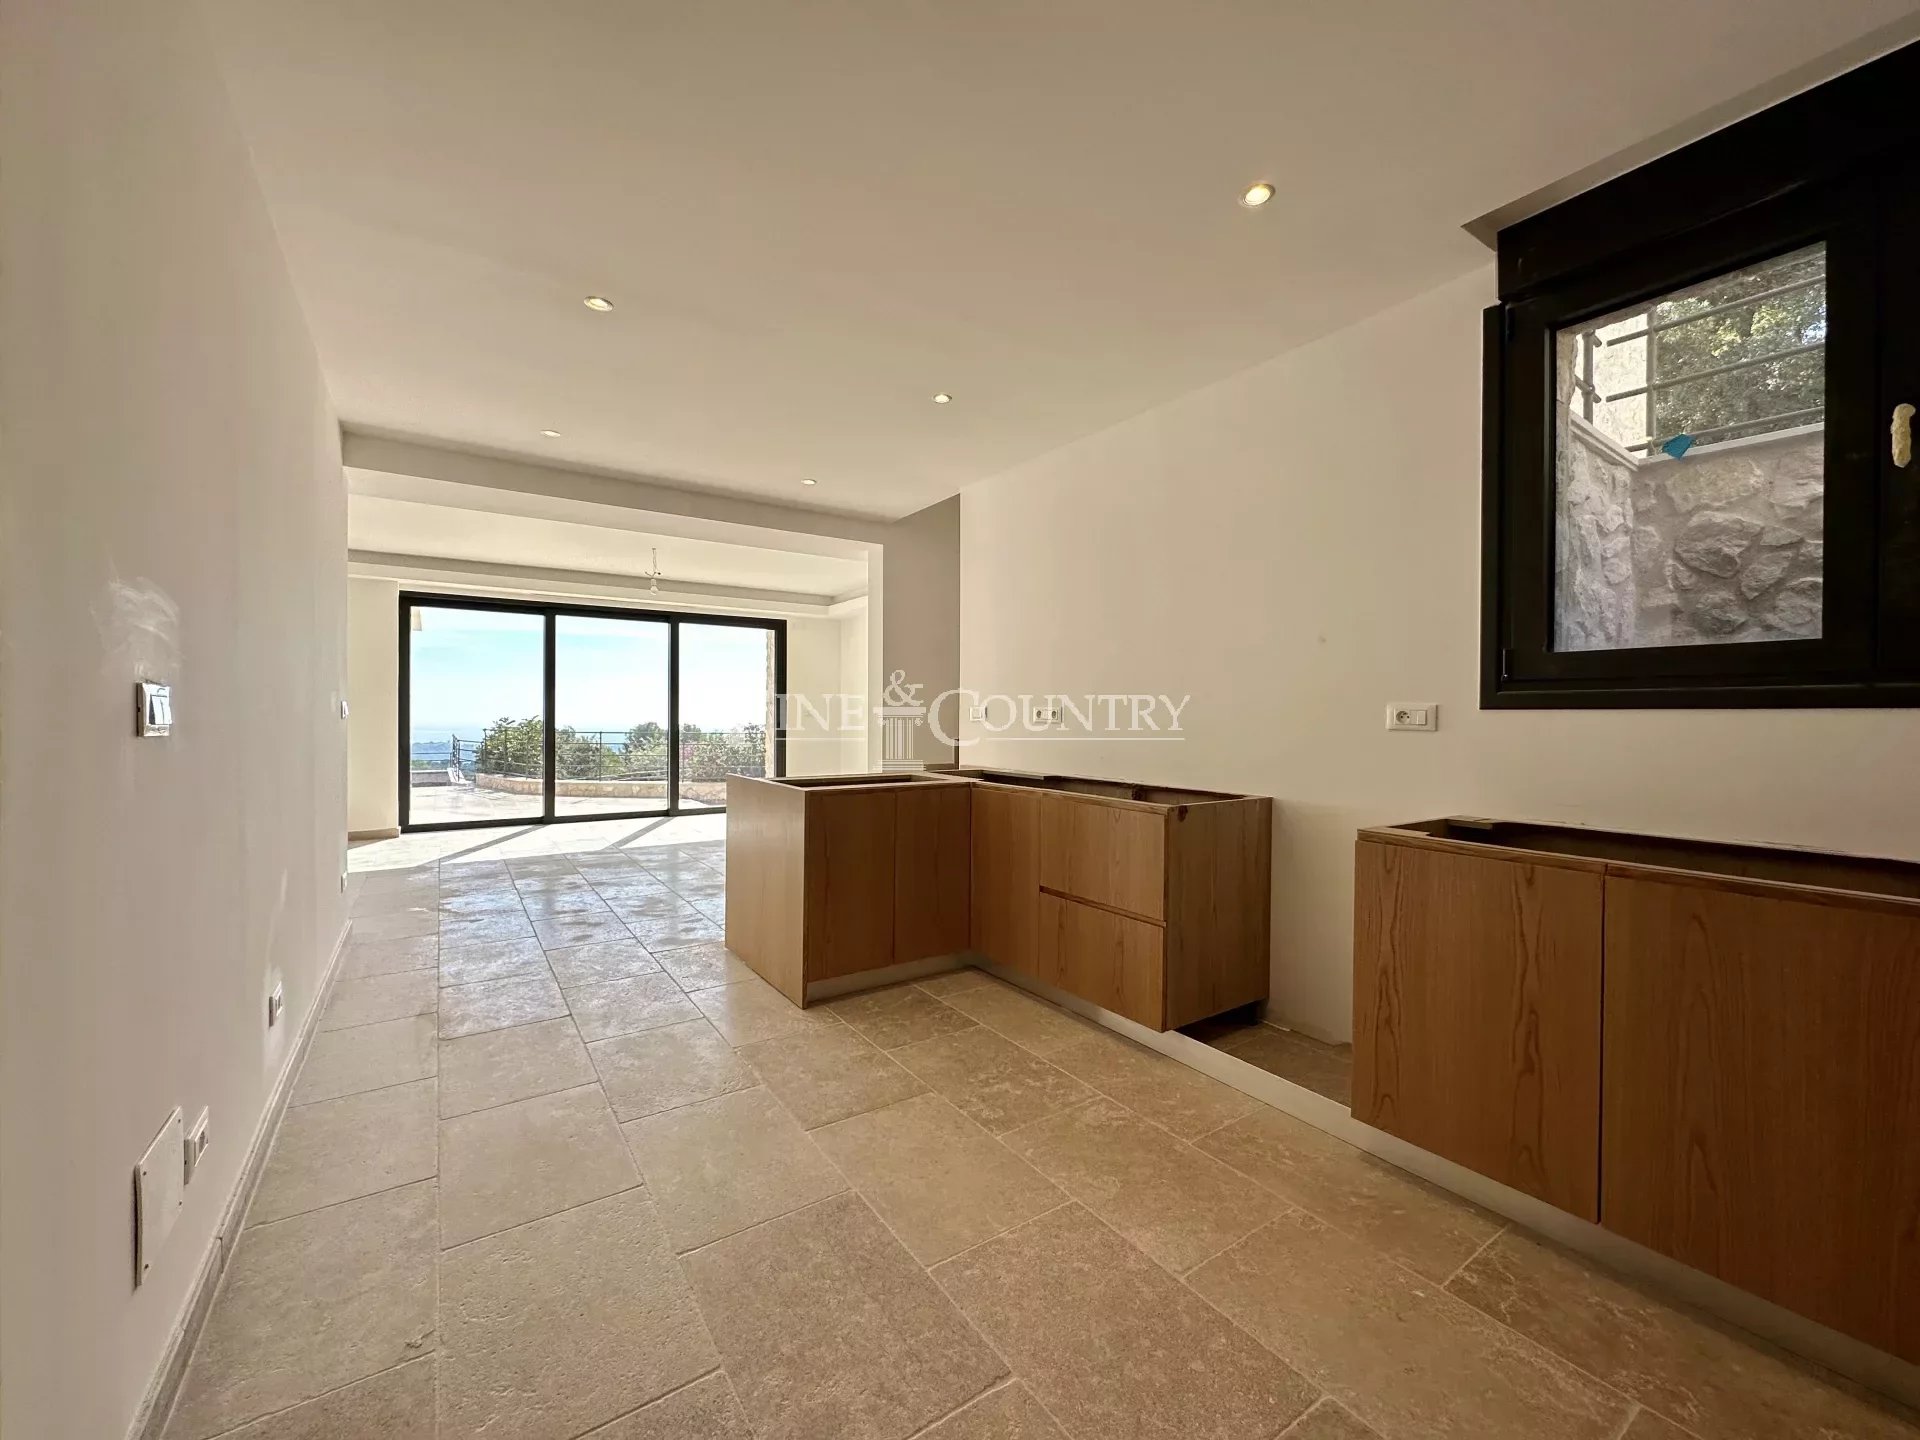 Photo of Luxury villa for sale by St Paul de Vence,  with panoramic views